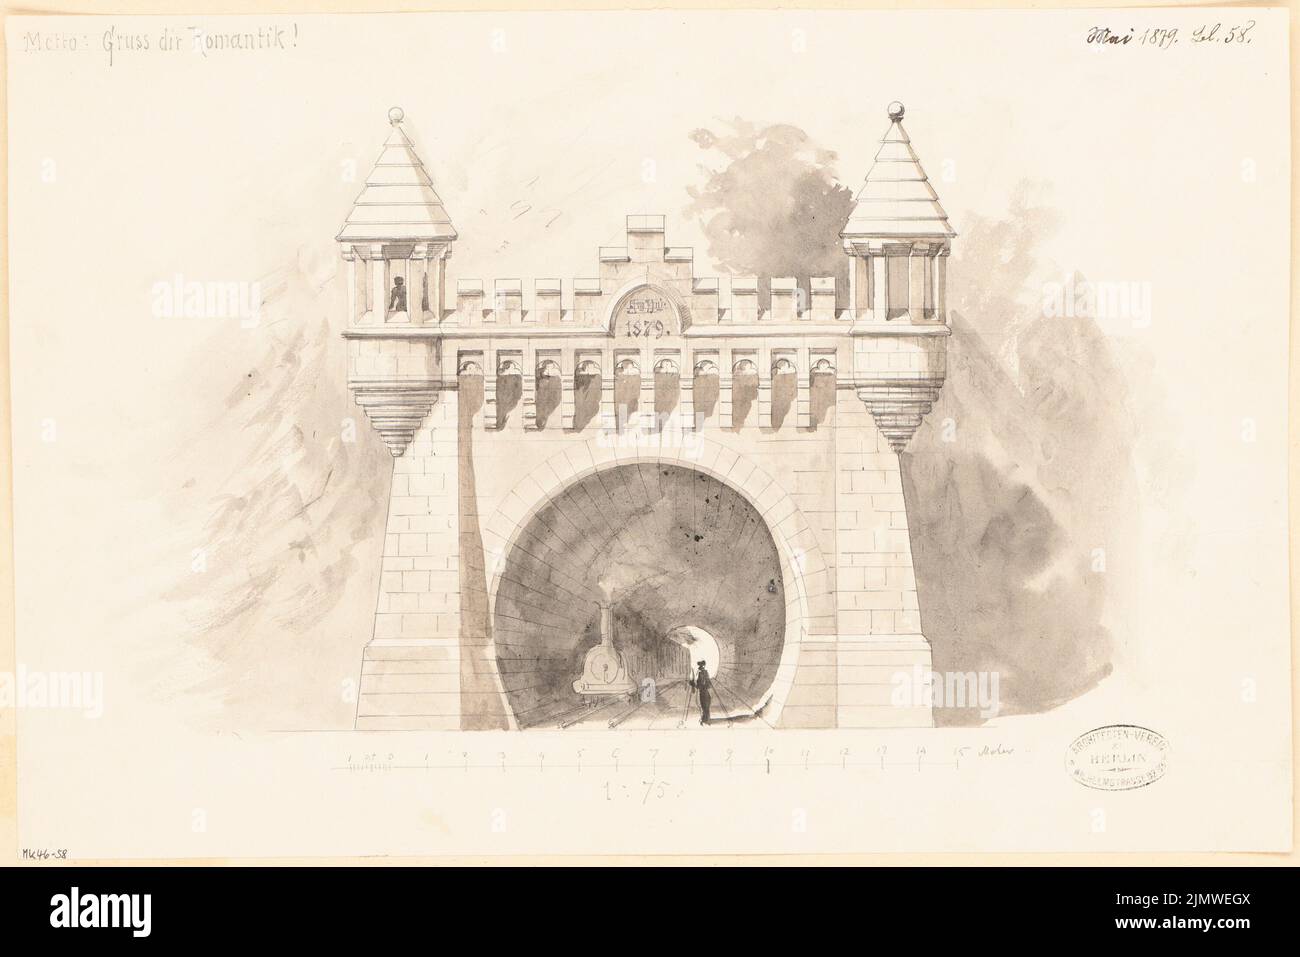 Unknown architect, tunnel portal. Monthly competition May 1879 (05.1879): Perspective view; Scale bar. Pencil watercolored on paper, 30.4 x 45.5 cm (including scan edges) N.N. : Tunnelportal. Monatskonkurrenz Mai 1879 Stock Photo